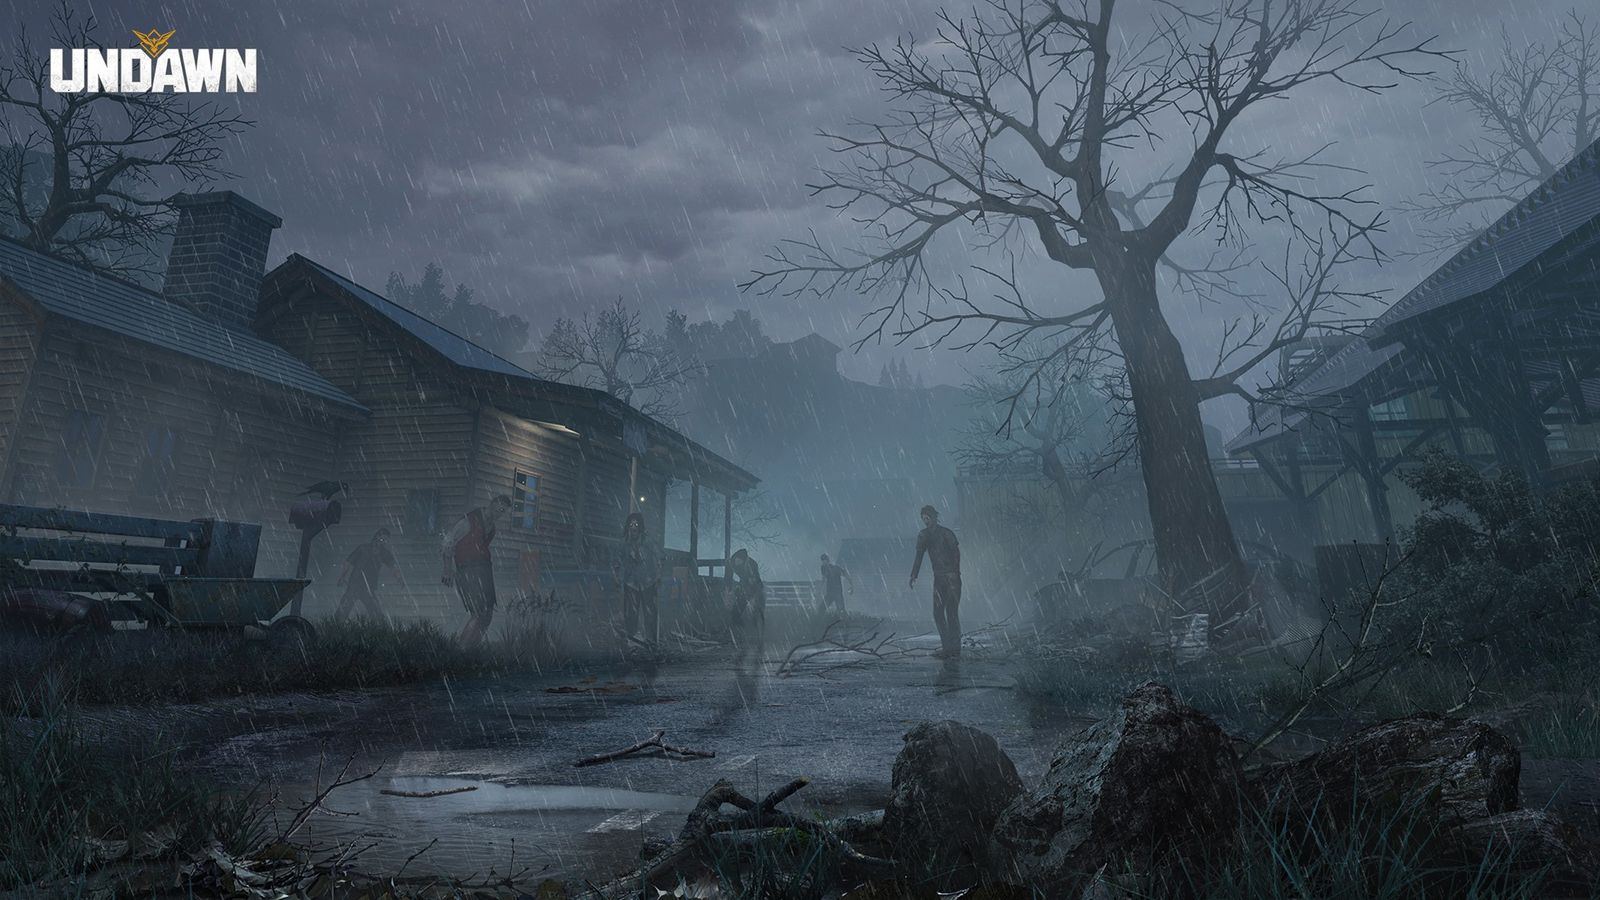 An official image of Undawn featuring some zombies.